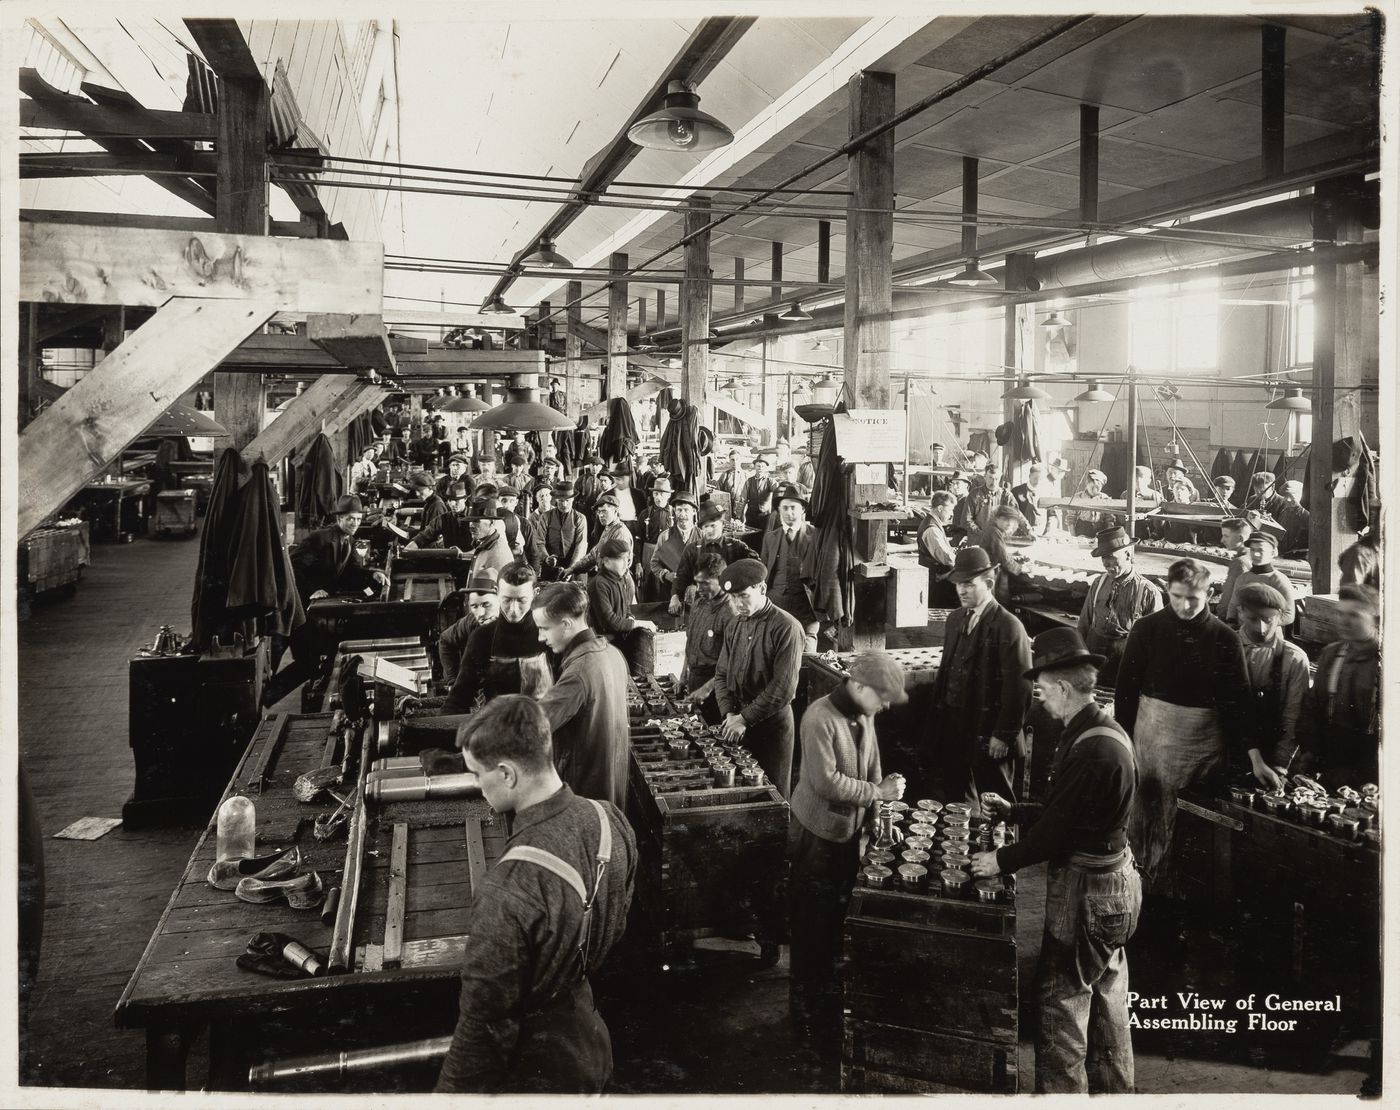 Interior view of workers on the general assembling floor of the Energite Explosives Plant No. 3, the Shell Loading Plant, Renfrew, Ontario, Canada